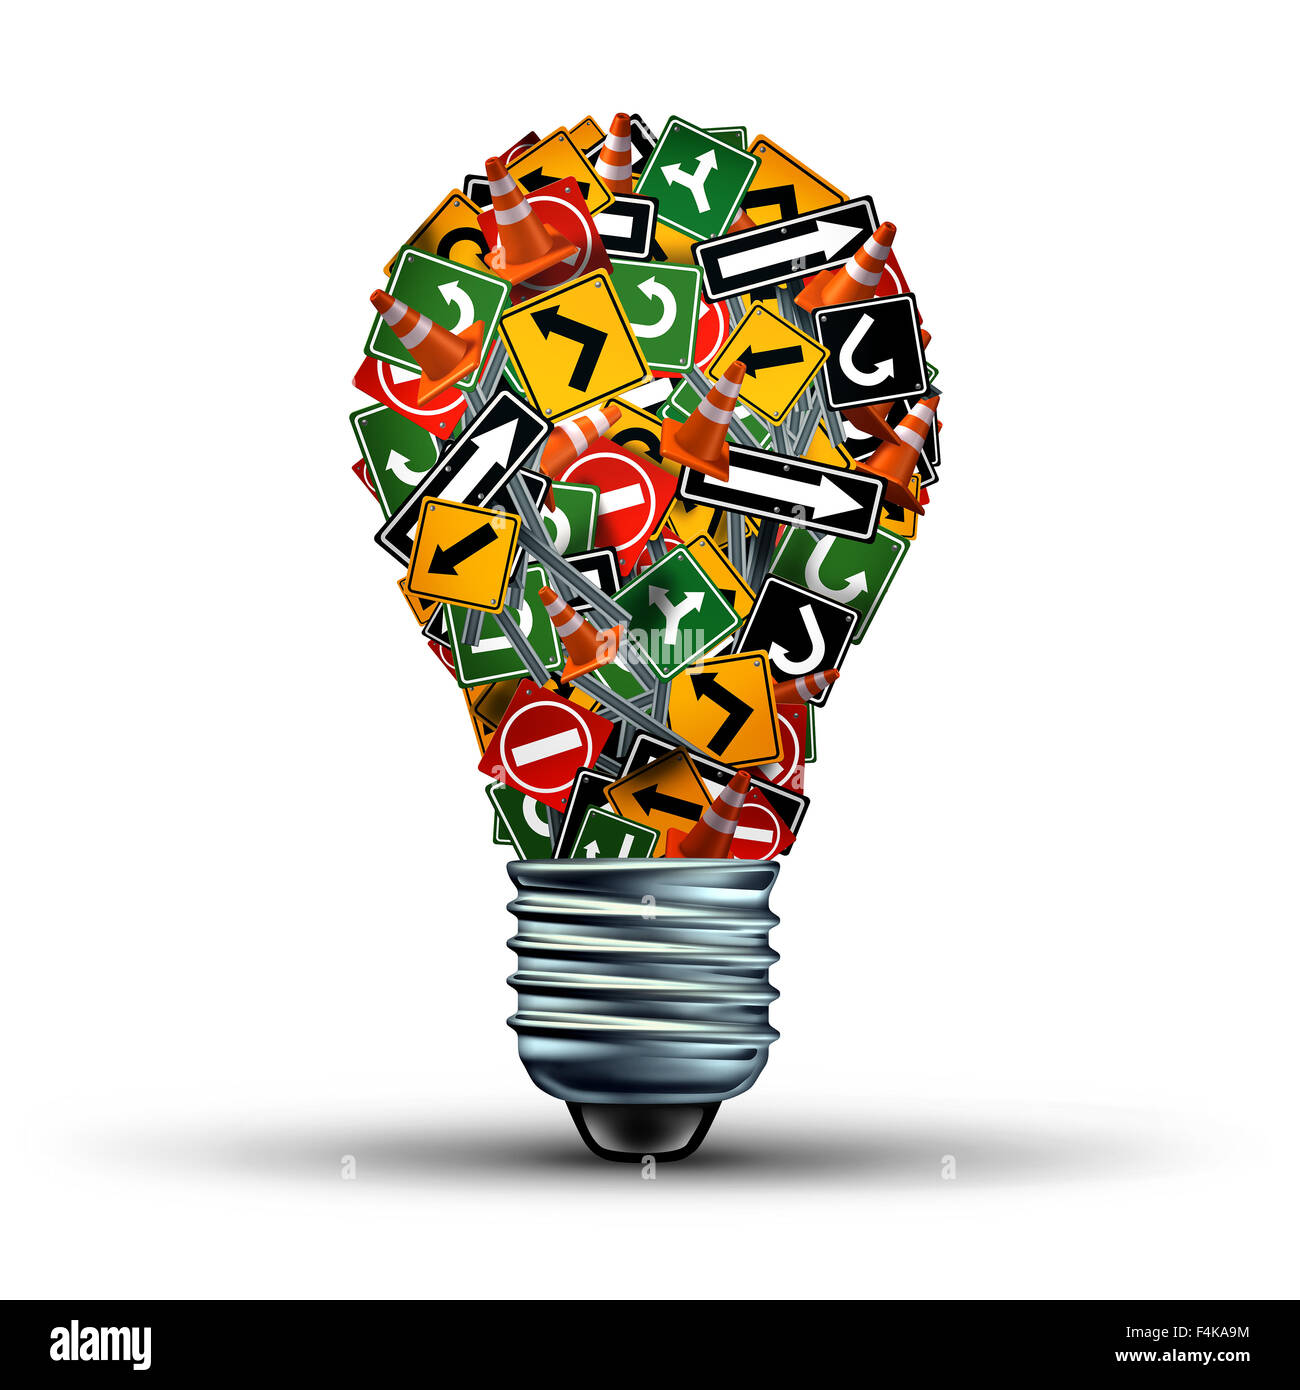 Creative guidance concept and Ideas direction as a business symbol with a group of highway and road signs in the shape of a light bulb as a creativity stress metaphor for an inspiration guide. Stock Photo